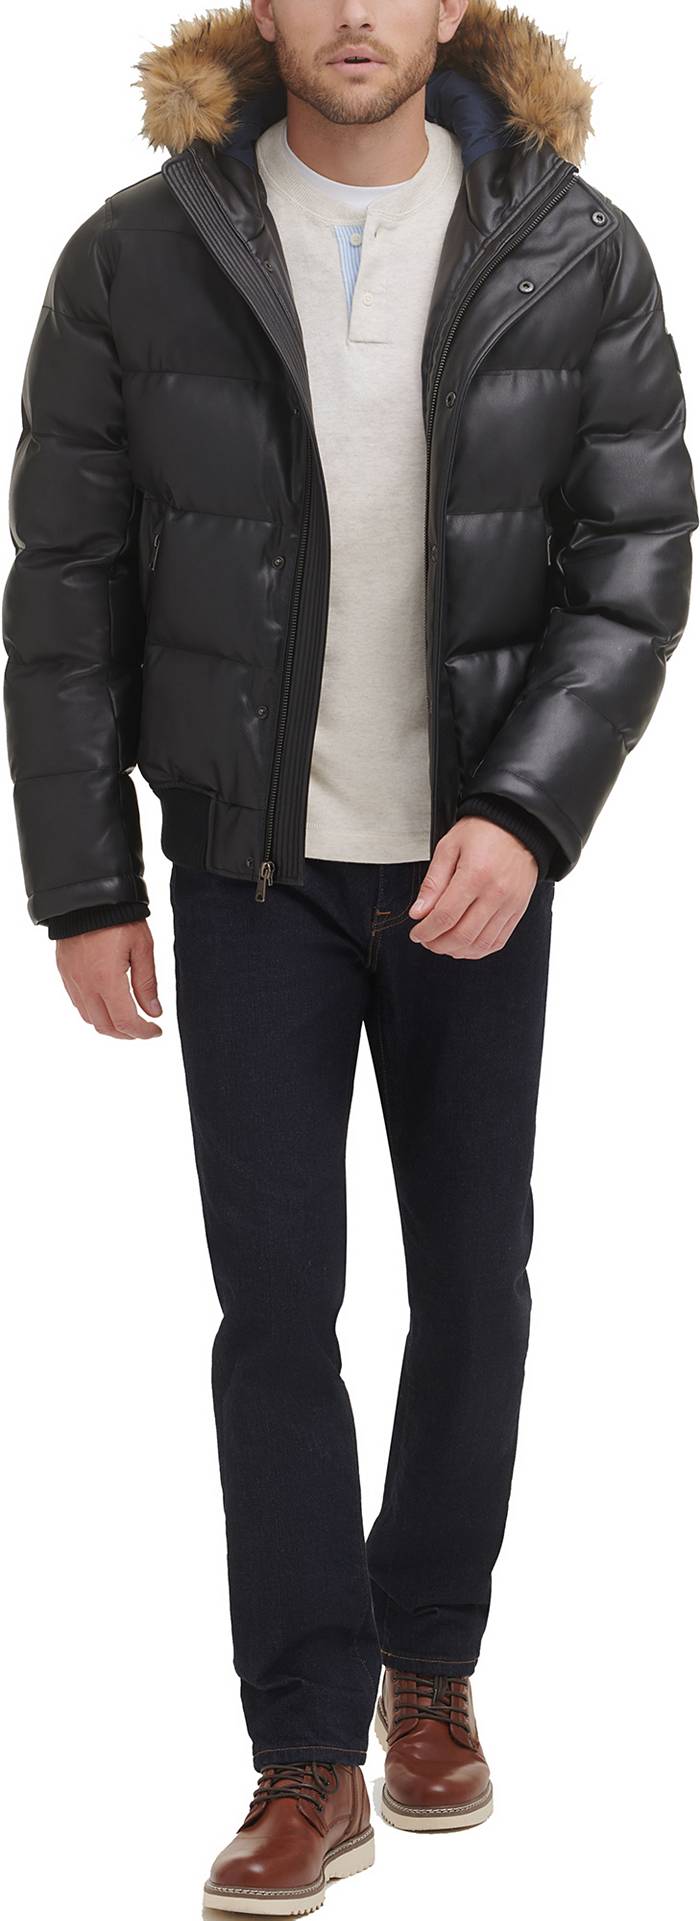 millimeter Spanien Passende Tommy Hilfiger Men's Faux Leather Quilted Snorkel Bomber Jacket with Faux  Fur Hood | Dick's Sporting Goods